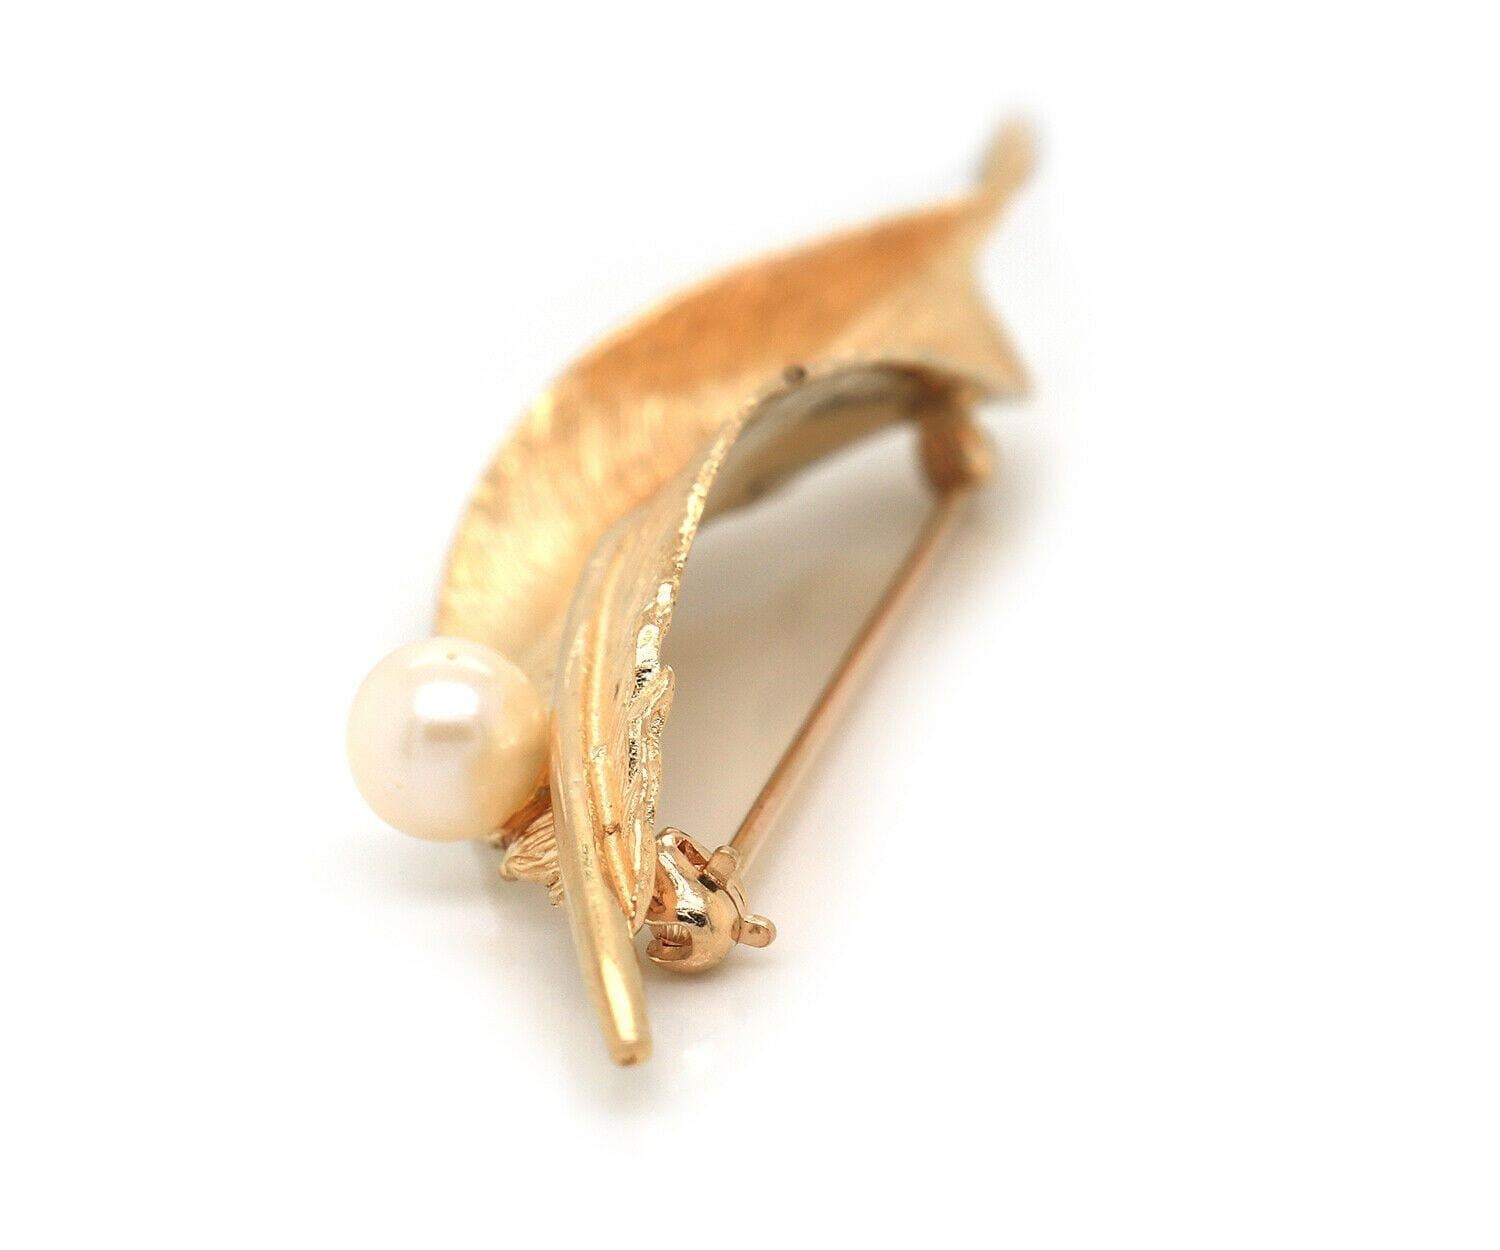 Classic 14K Gold Textures Feather Brooch Pin W/ Pearl

Classic Textured Feather Brooch Pin With Pearl
14K Yellow Gold
Pearl Size: 5.75mm
Pin Size: 2.50 Inches in Length, 0.75 Inches Height
Pin Weight: 7.9 Grams
Stamped 14K

Condition:
Offered for